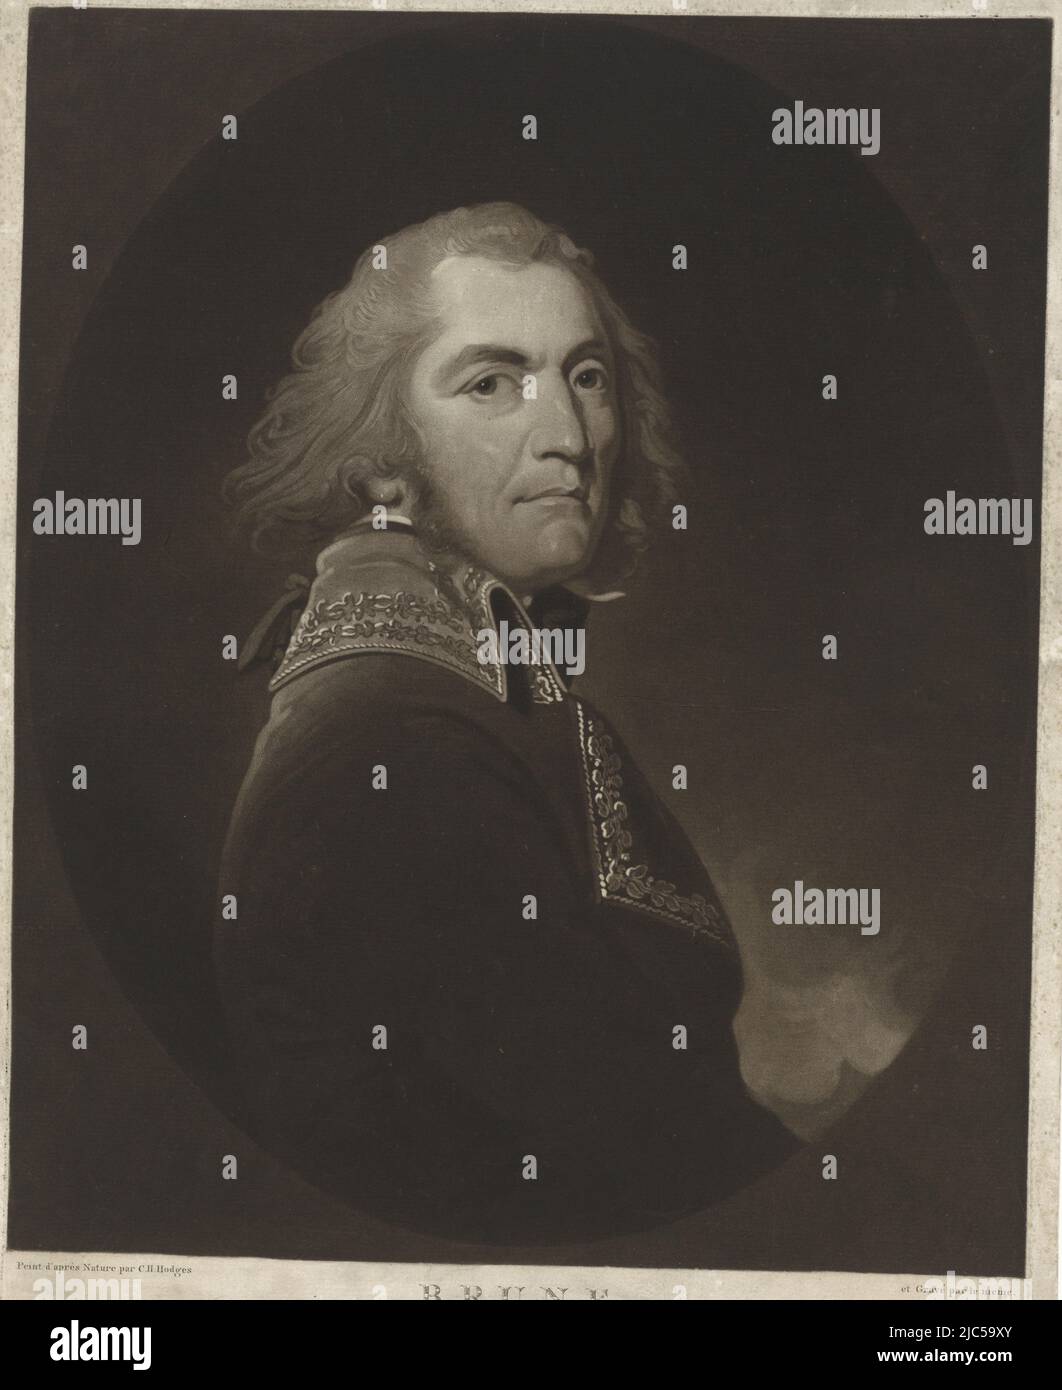 The French Marshal Guillaume-Marie-Anne Brune, commander of the French army in the Netherlands, Portrait of Guillaume-Marie-Anne Brune, print maker: Charles Howard Hodges, (mentioned on object), publisher: Charles Howard Hodges, (mentioned on object), publisher: Evert Maaskamp, (mentioned on object), print maker: Amsterdam, publisher: Amsterdam, publisher: Amsterdam, publisher: Paris, 1788 - 1817, paper, engraving, h 470 mm × w 342 mm Stock Photo